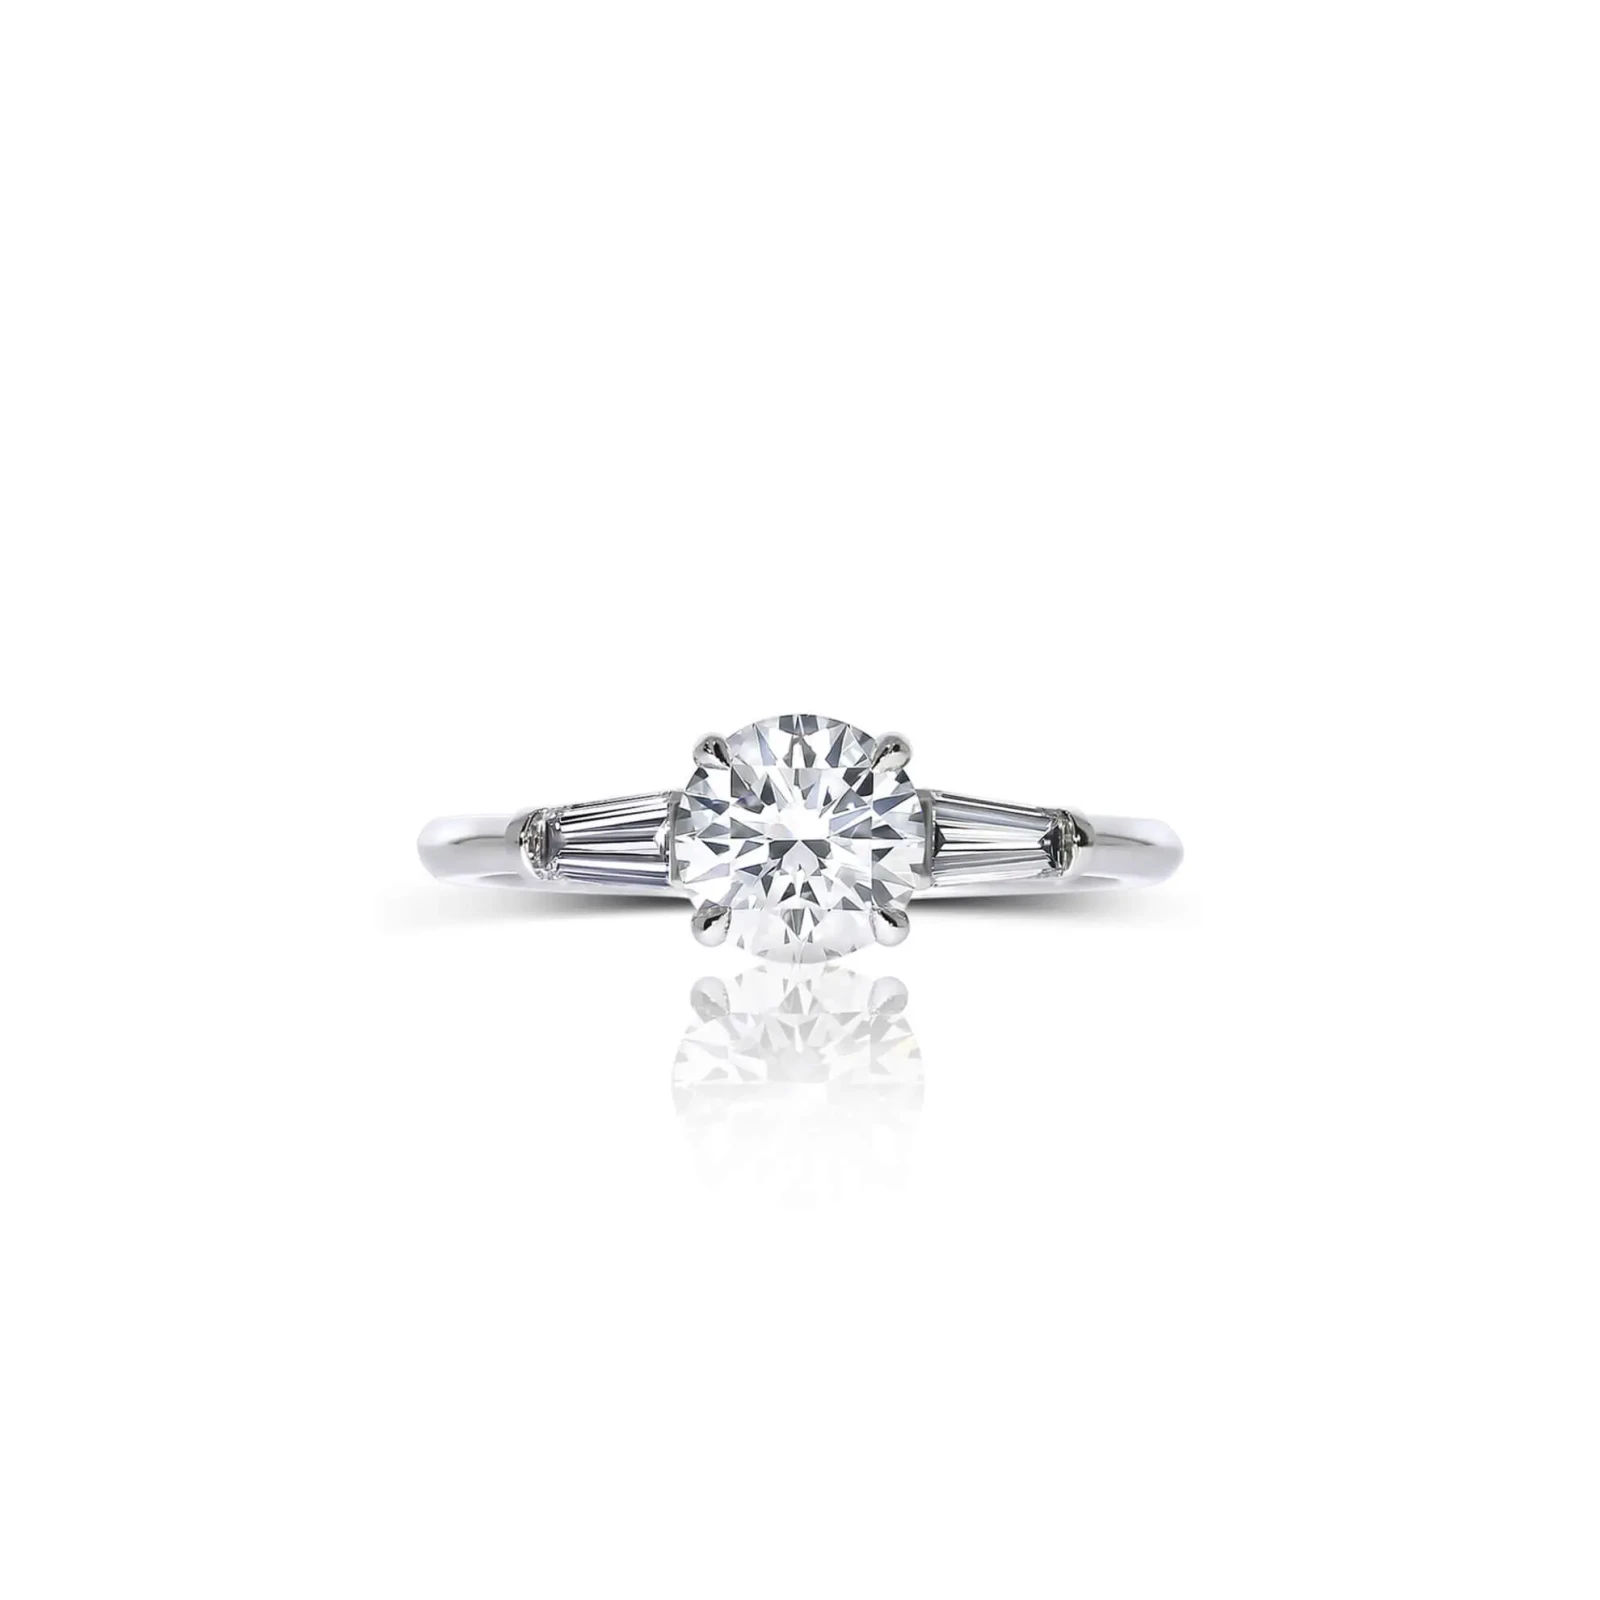 Round Diamond Trilogy Engagement Ring with Tapered Baguette Cut Side Stones